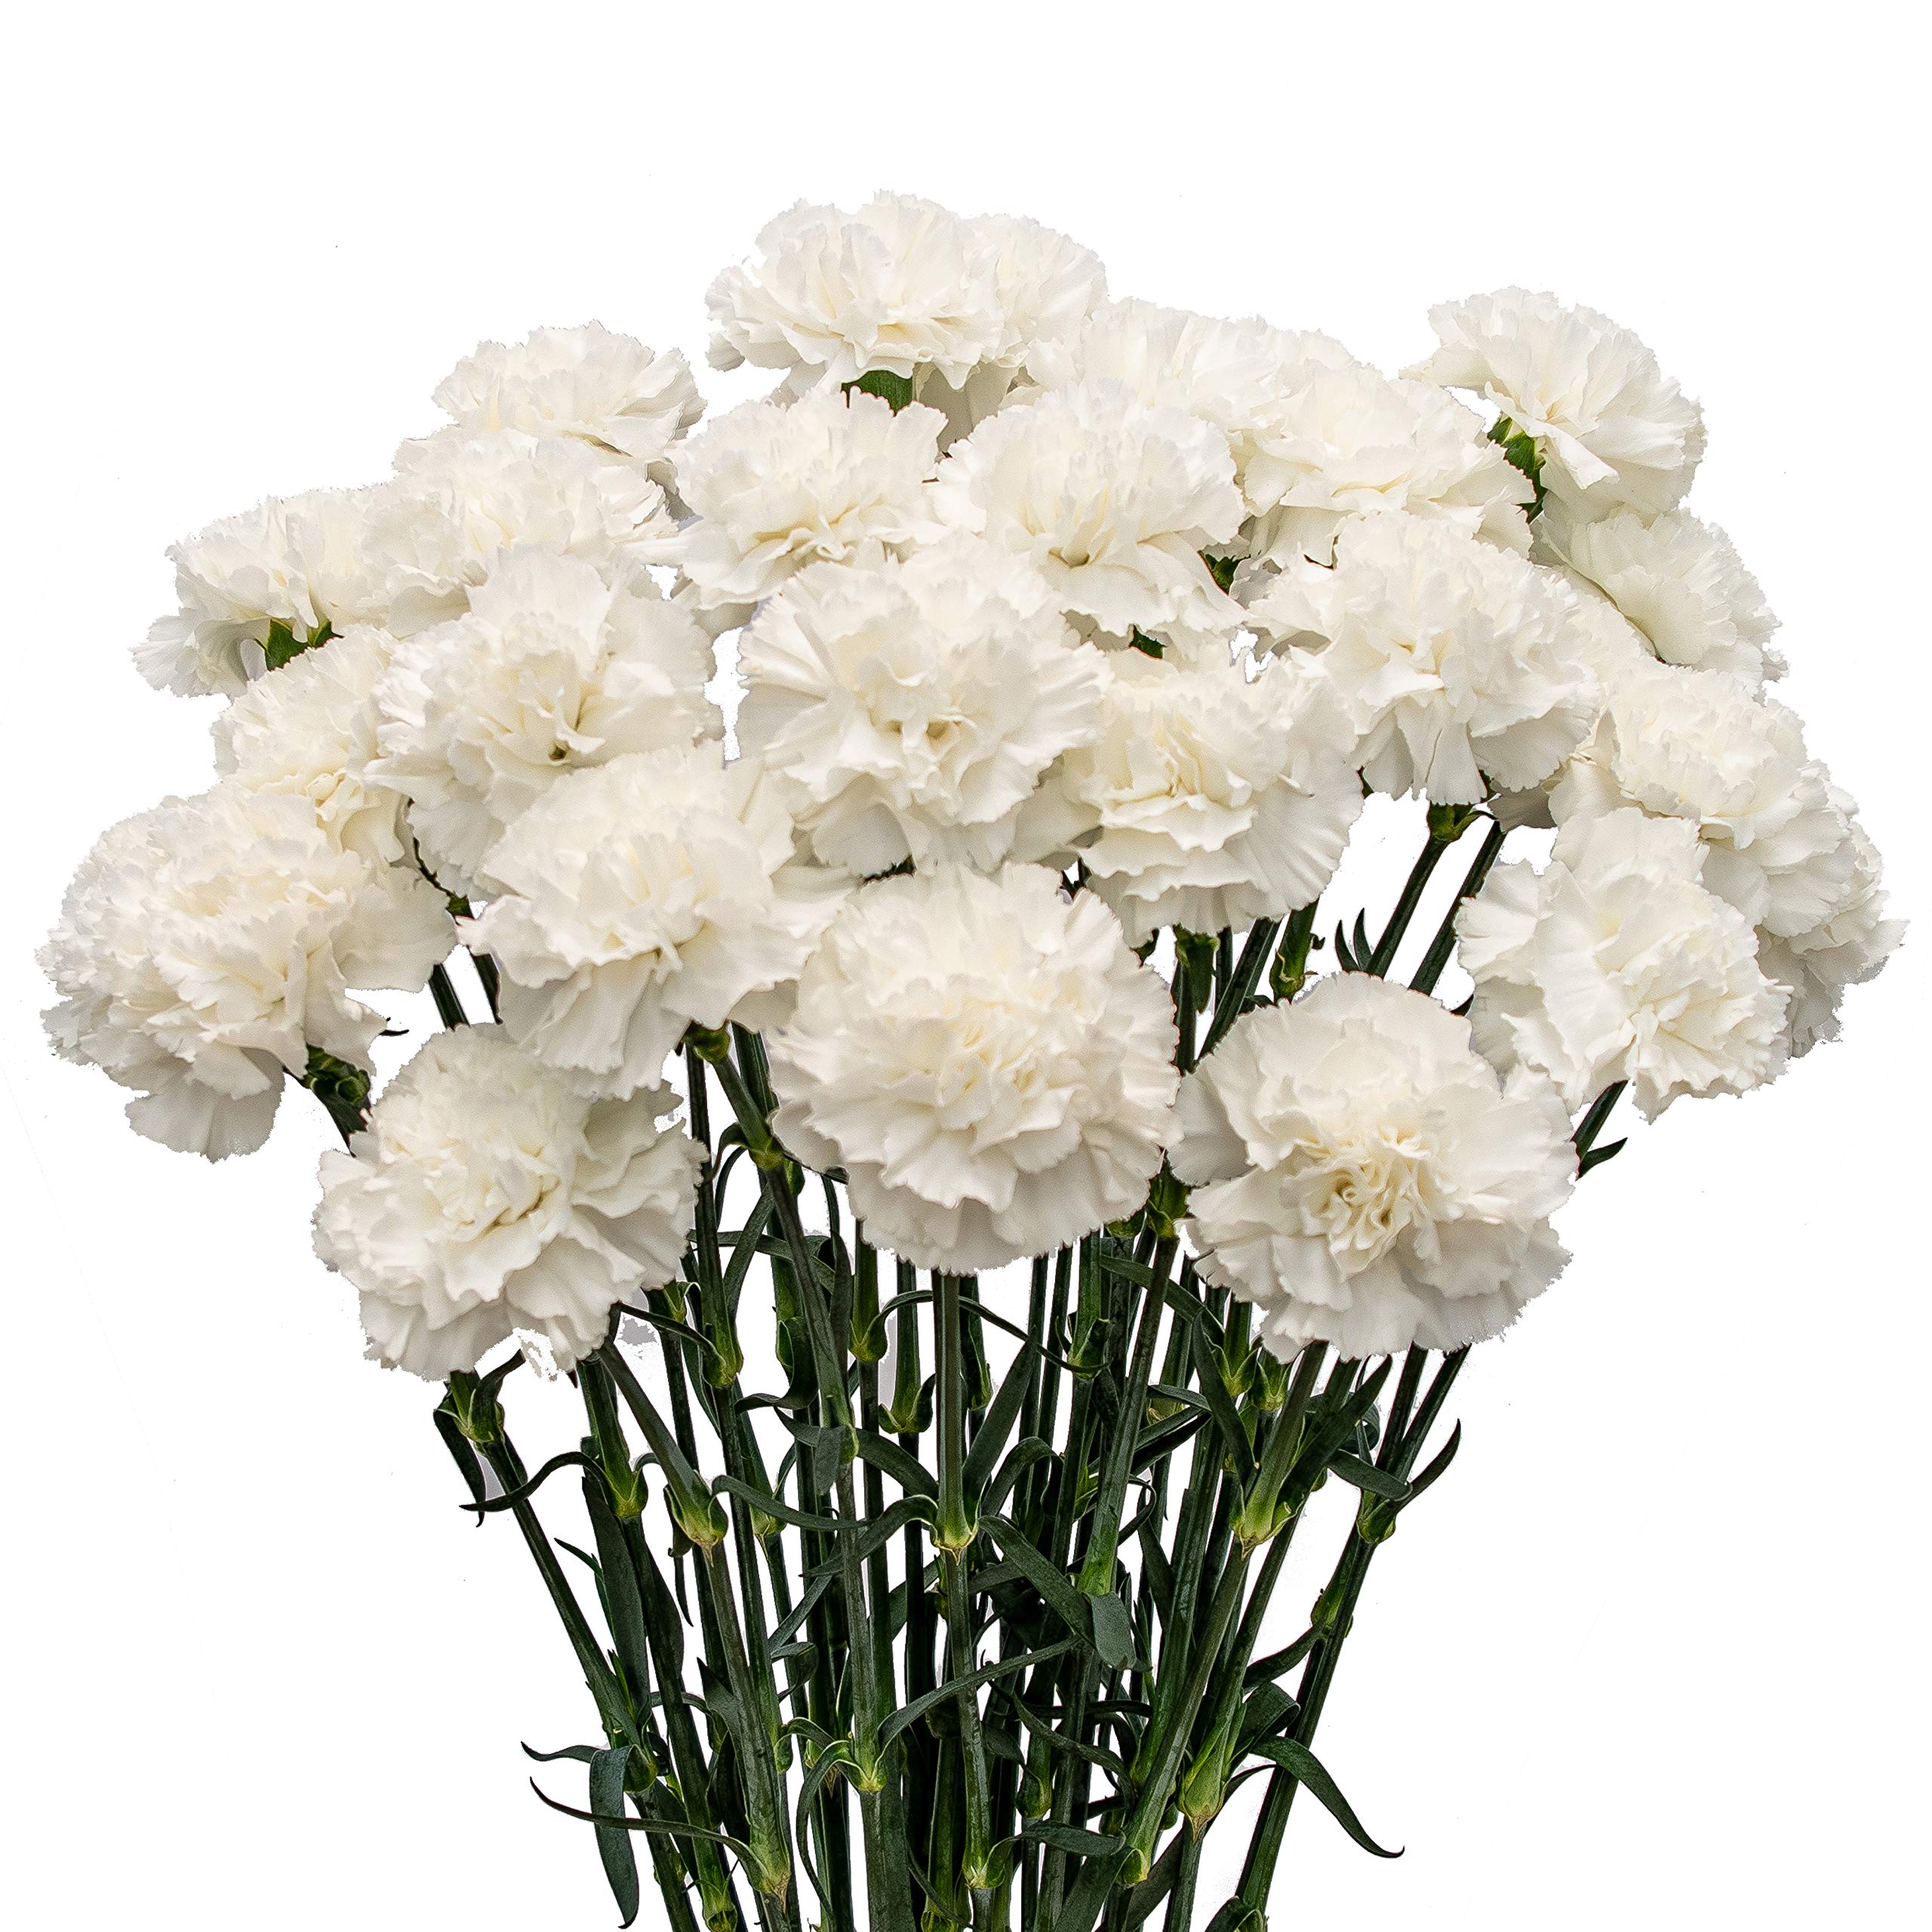 White Carnations Bunch - 25 stems of white carnations.  Fresh cut imported from Ecuador. Don't see what you are looking for? Call our shop we can custom order anything